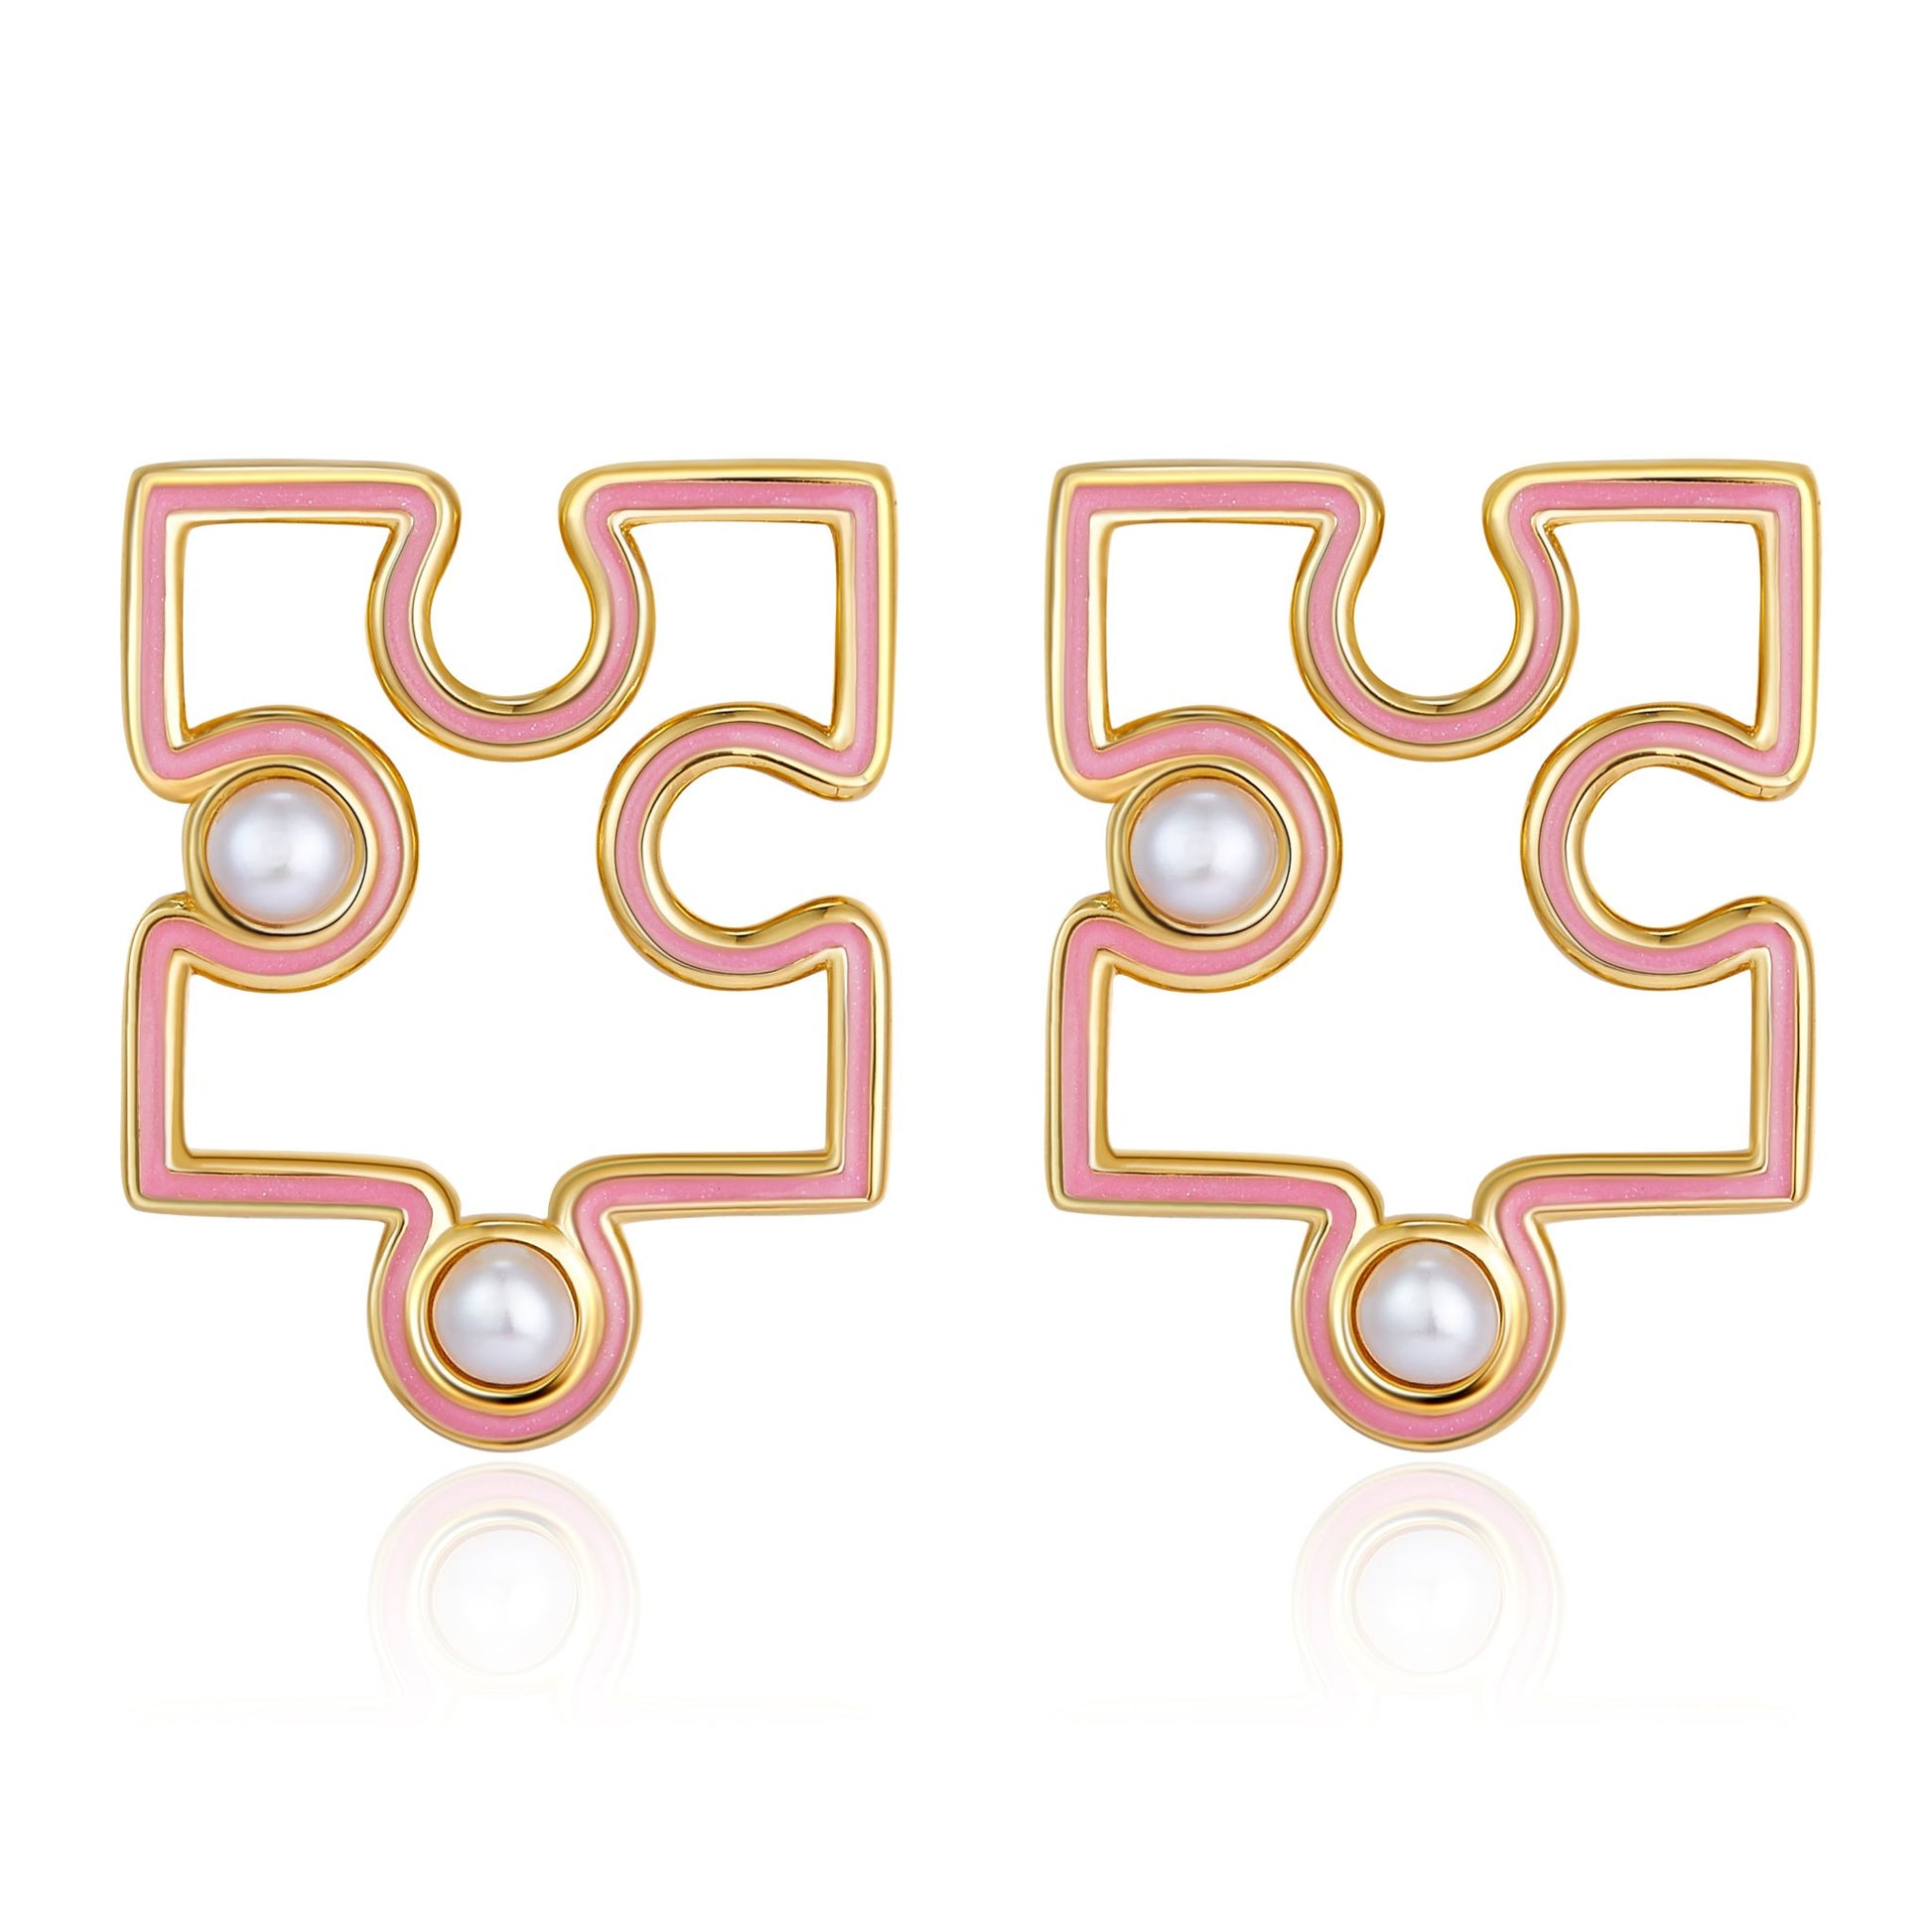 Golden Puzzle Enamel with Pearls Studs Earrings for Women